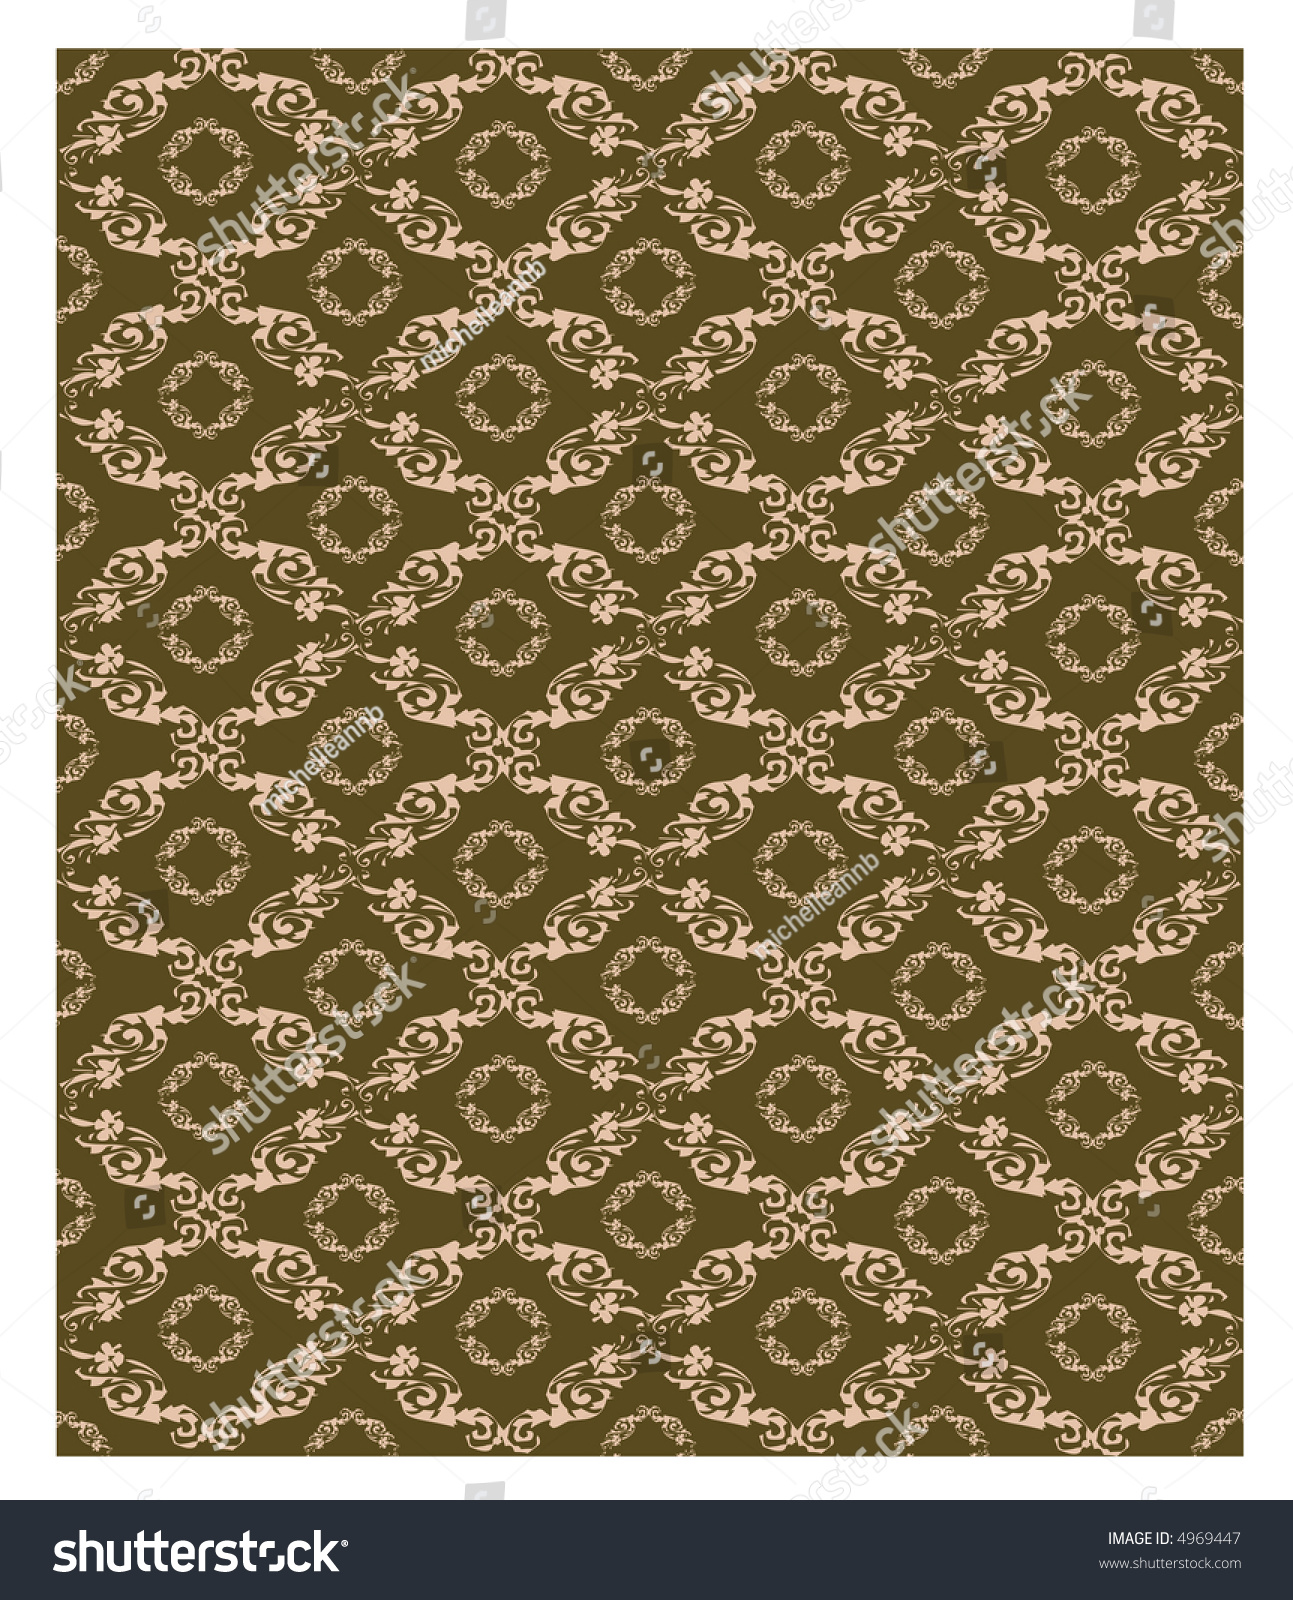 Old Time Victorian Patterned Background Great For Web-Page, Scrap ...